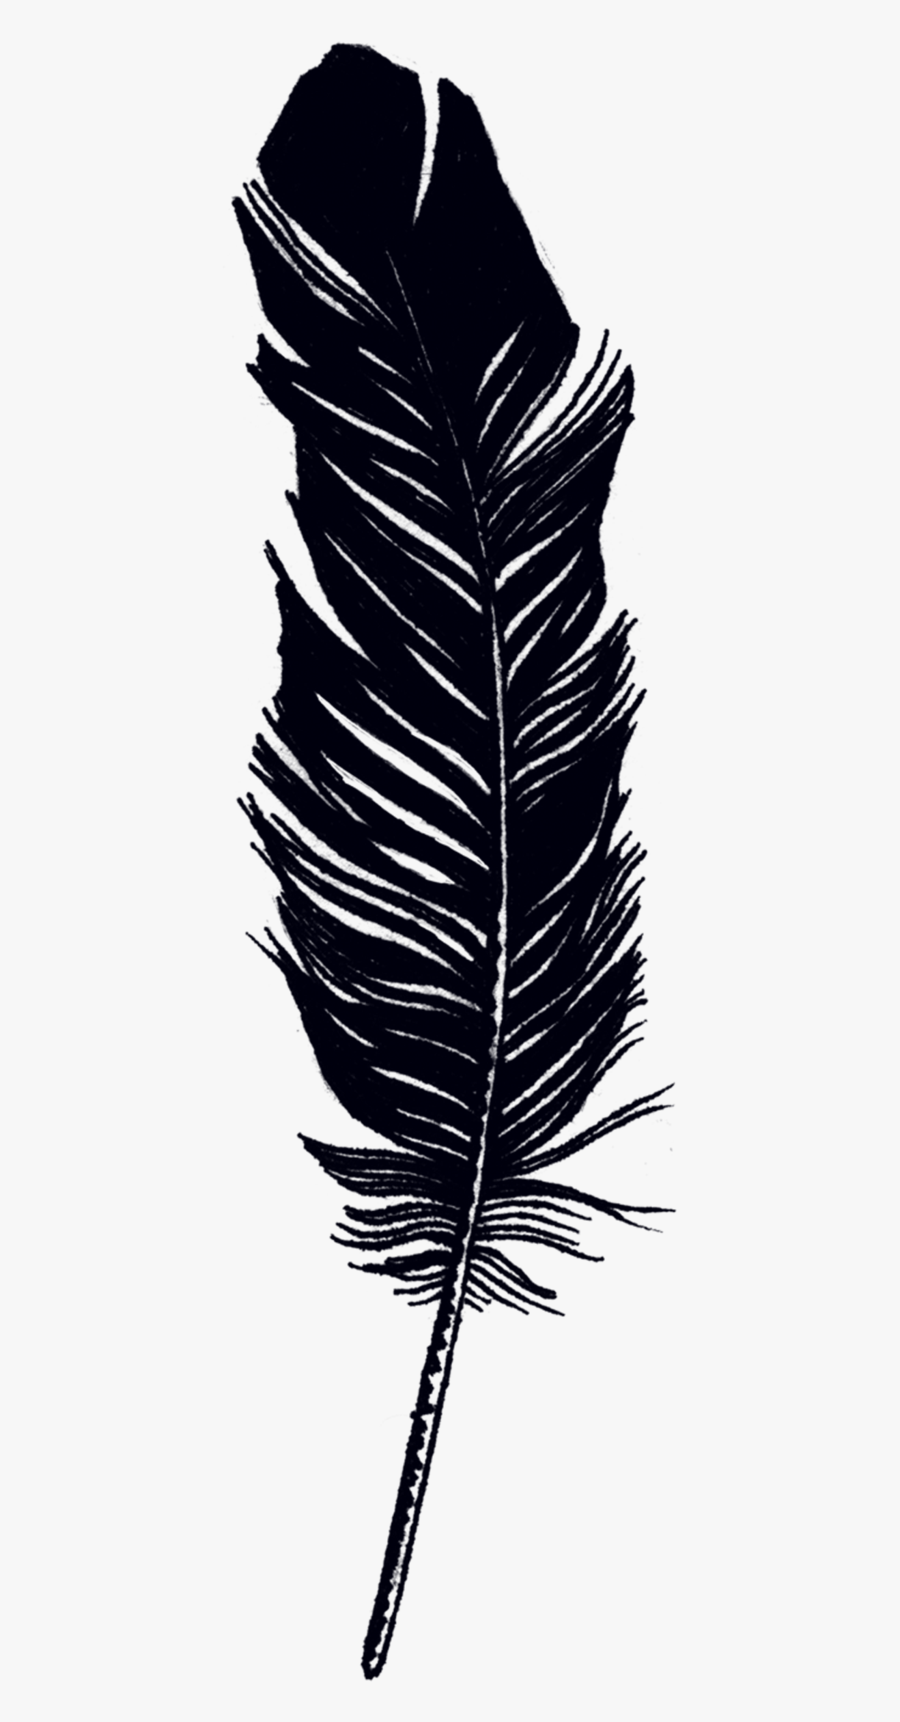 Feathers Transparent Clipart Free - Black Tattoos On Paper, Transparent Clipart